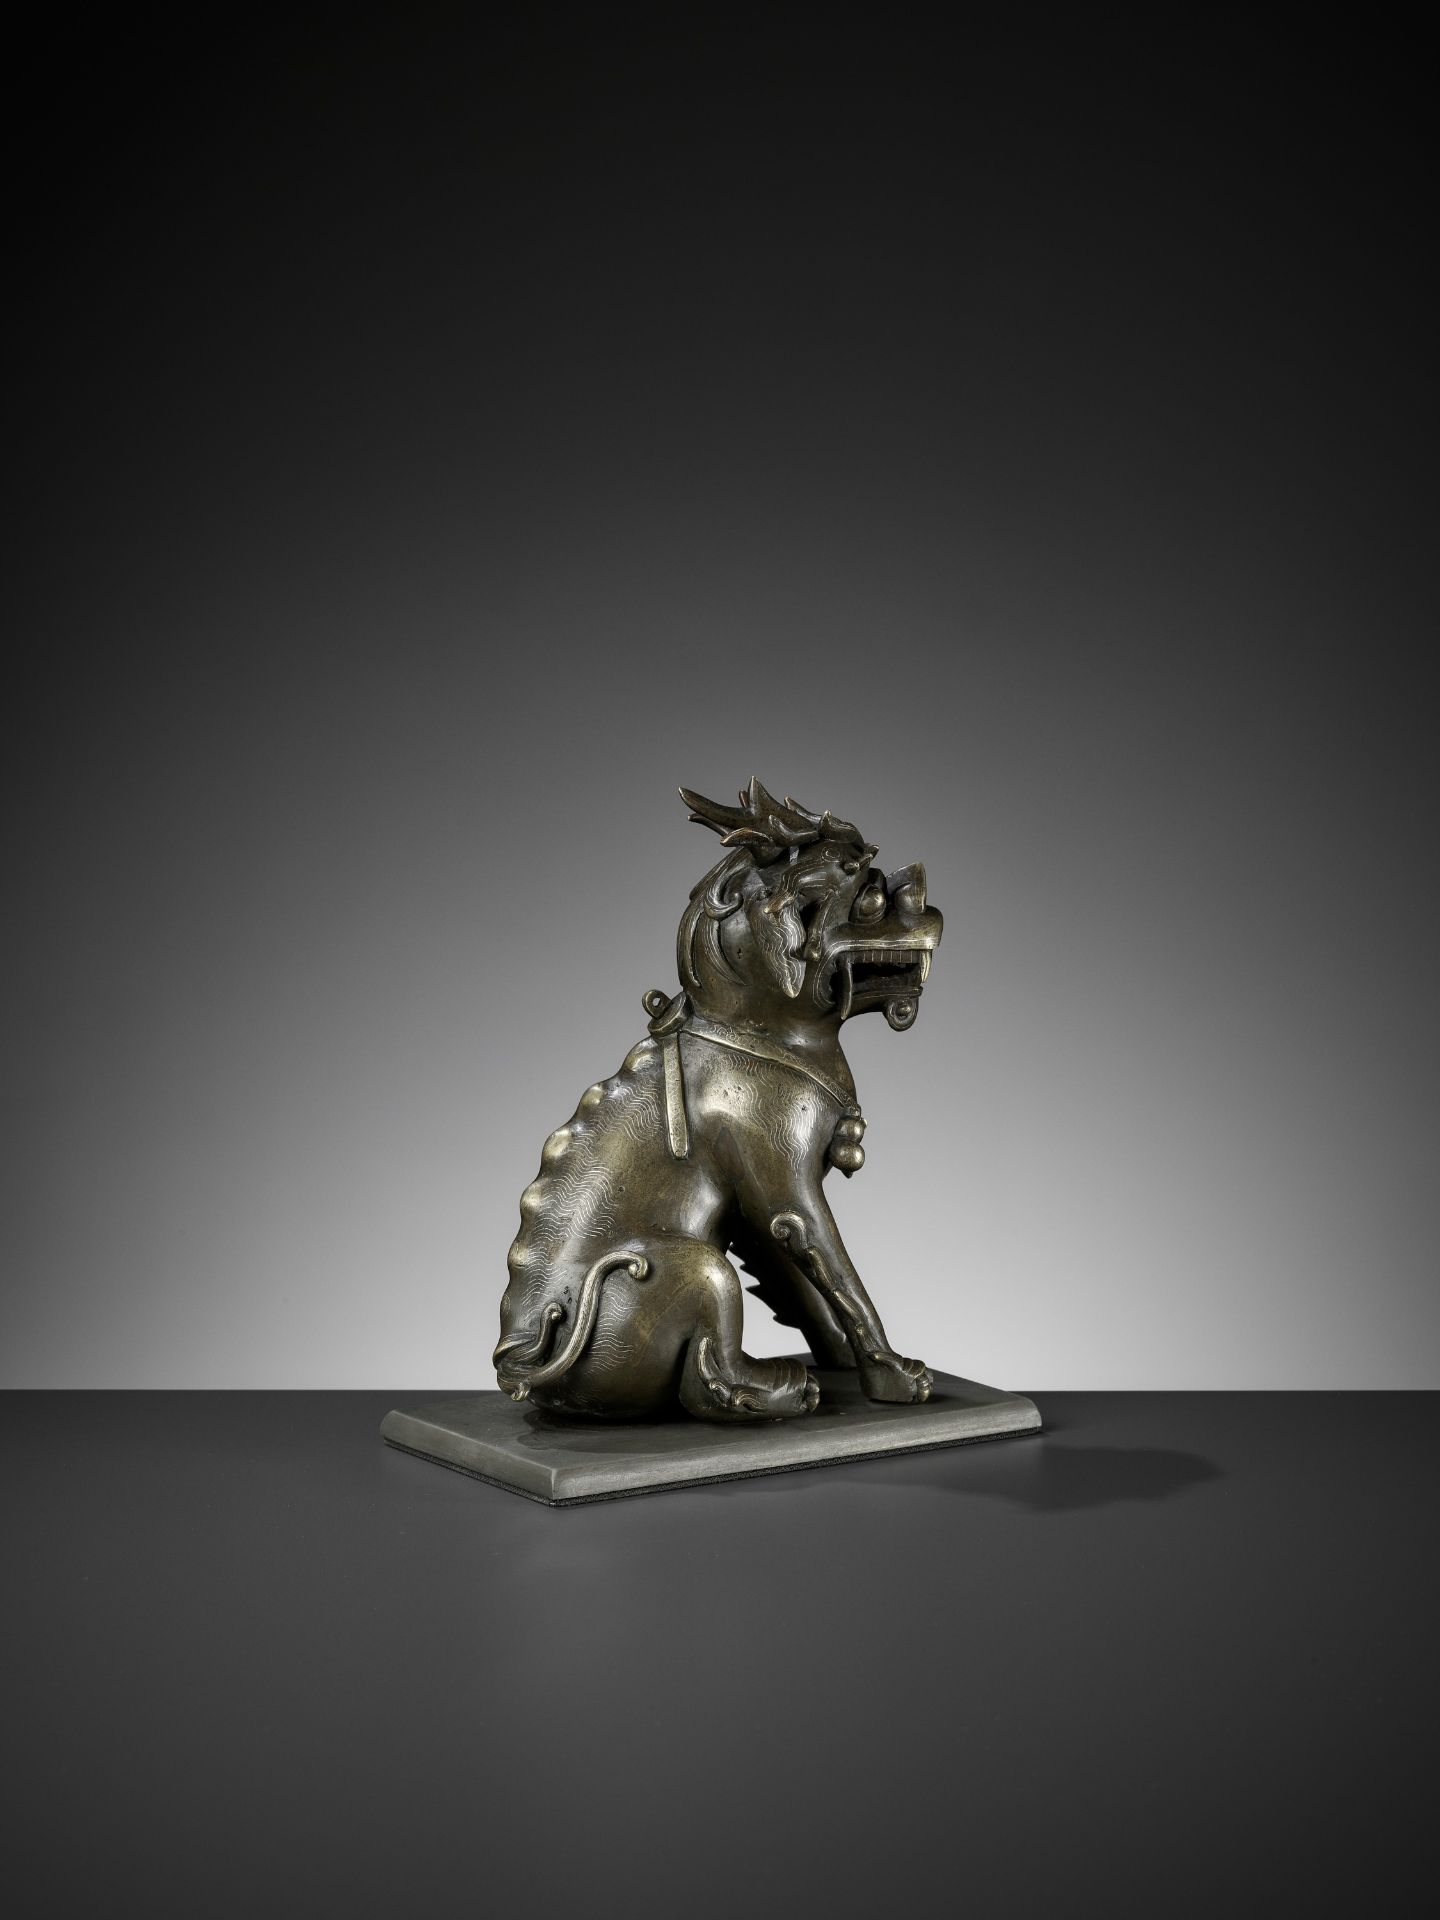 A SILVER WIRE-INLAID BRONZE FIGURE OF A QILIN, ATTRIBUTED TO SHISOU, QING DYNASTY - Image 8 of 12